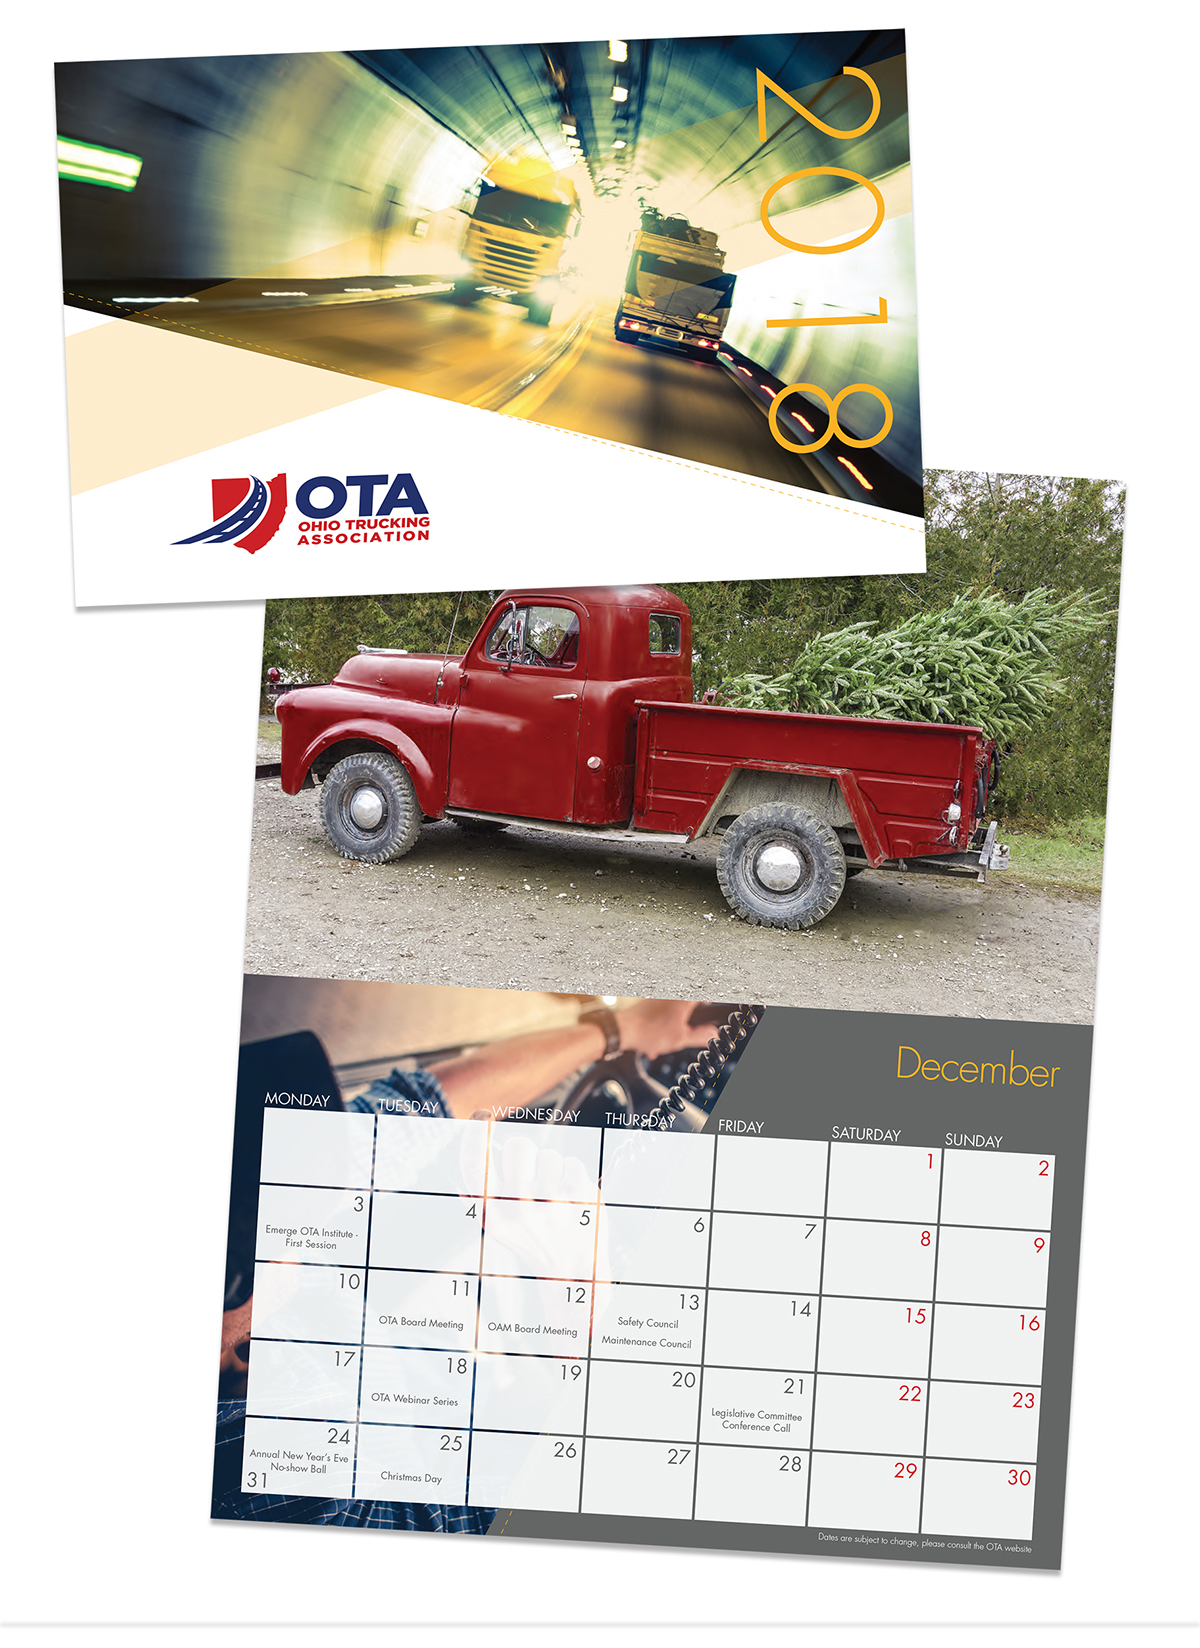 annual reports brochures Logo Design Website Design digital design promotional items expo collateral Corporate Identity invitations Fliers Programs booklets training materials newsletters ads